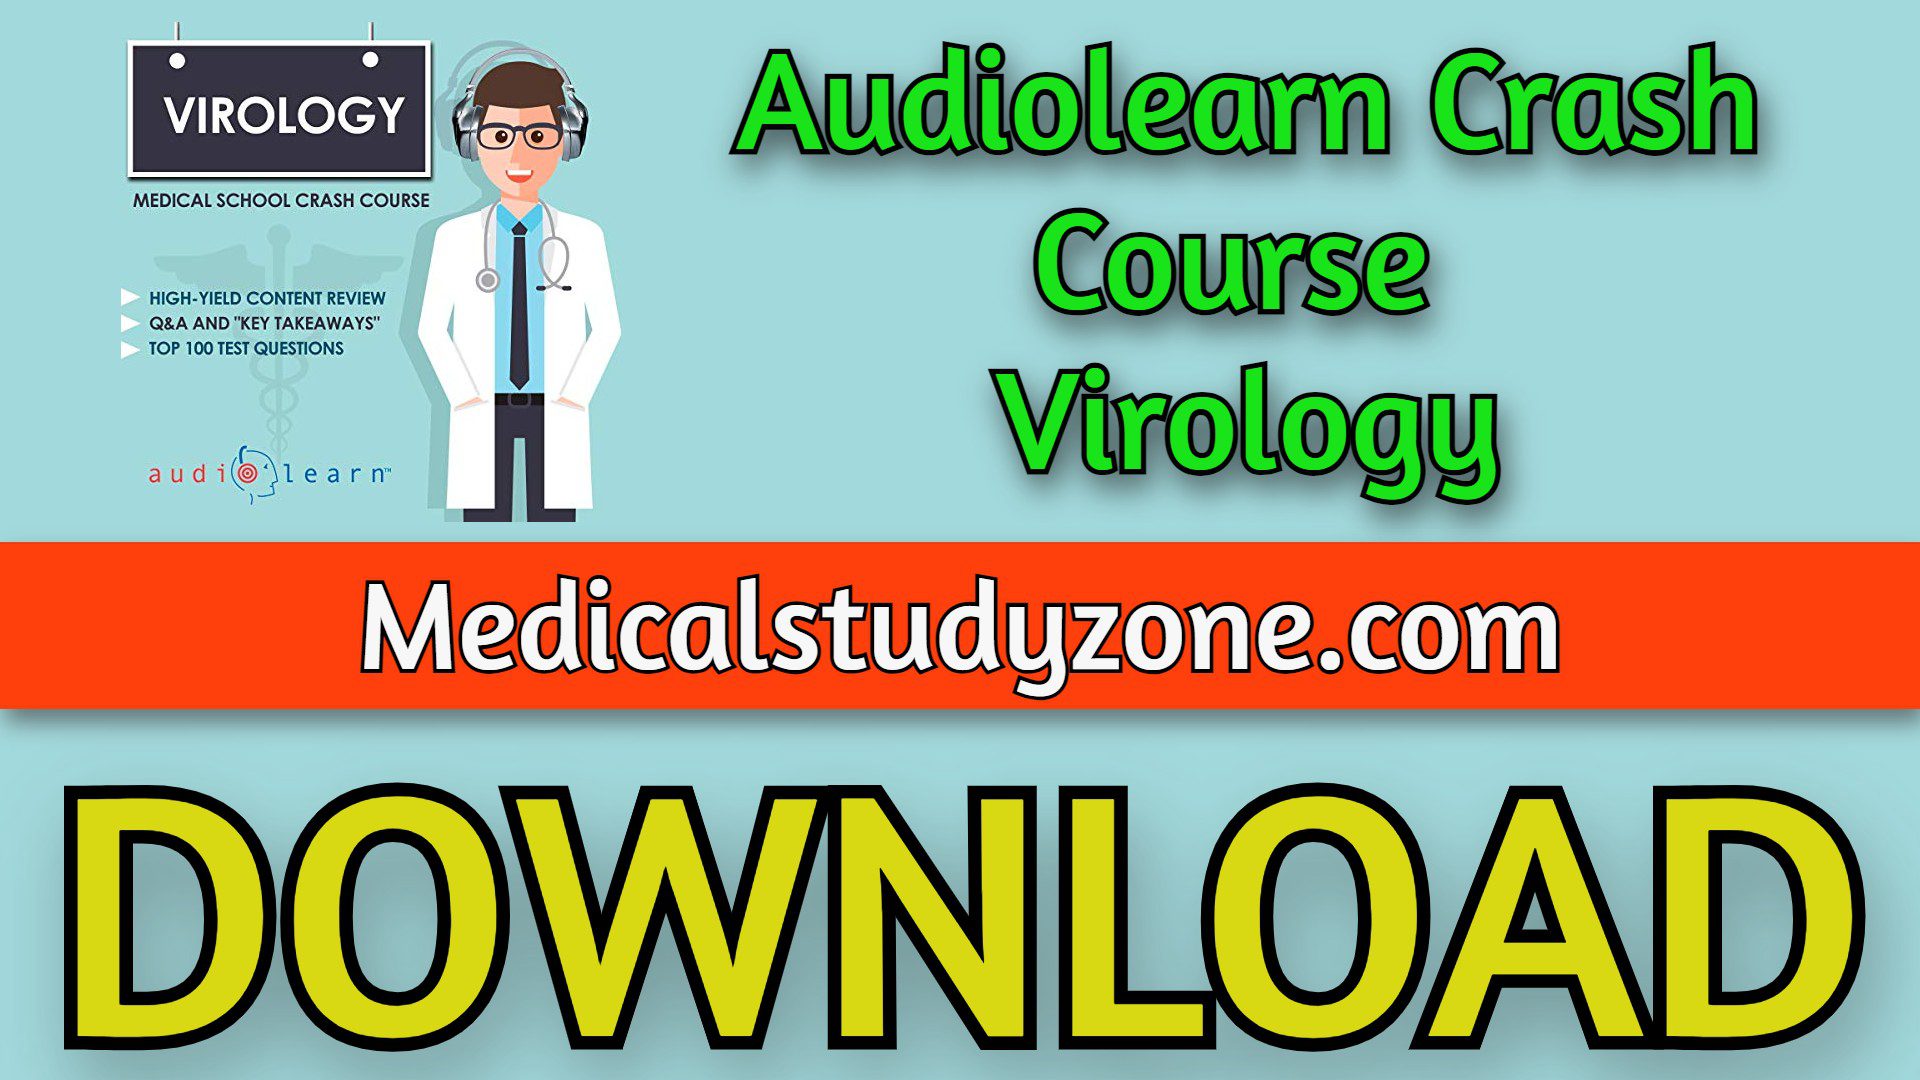 Audiolearn Crash Course Virology 2021 Free Download